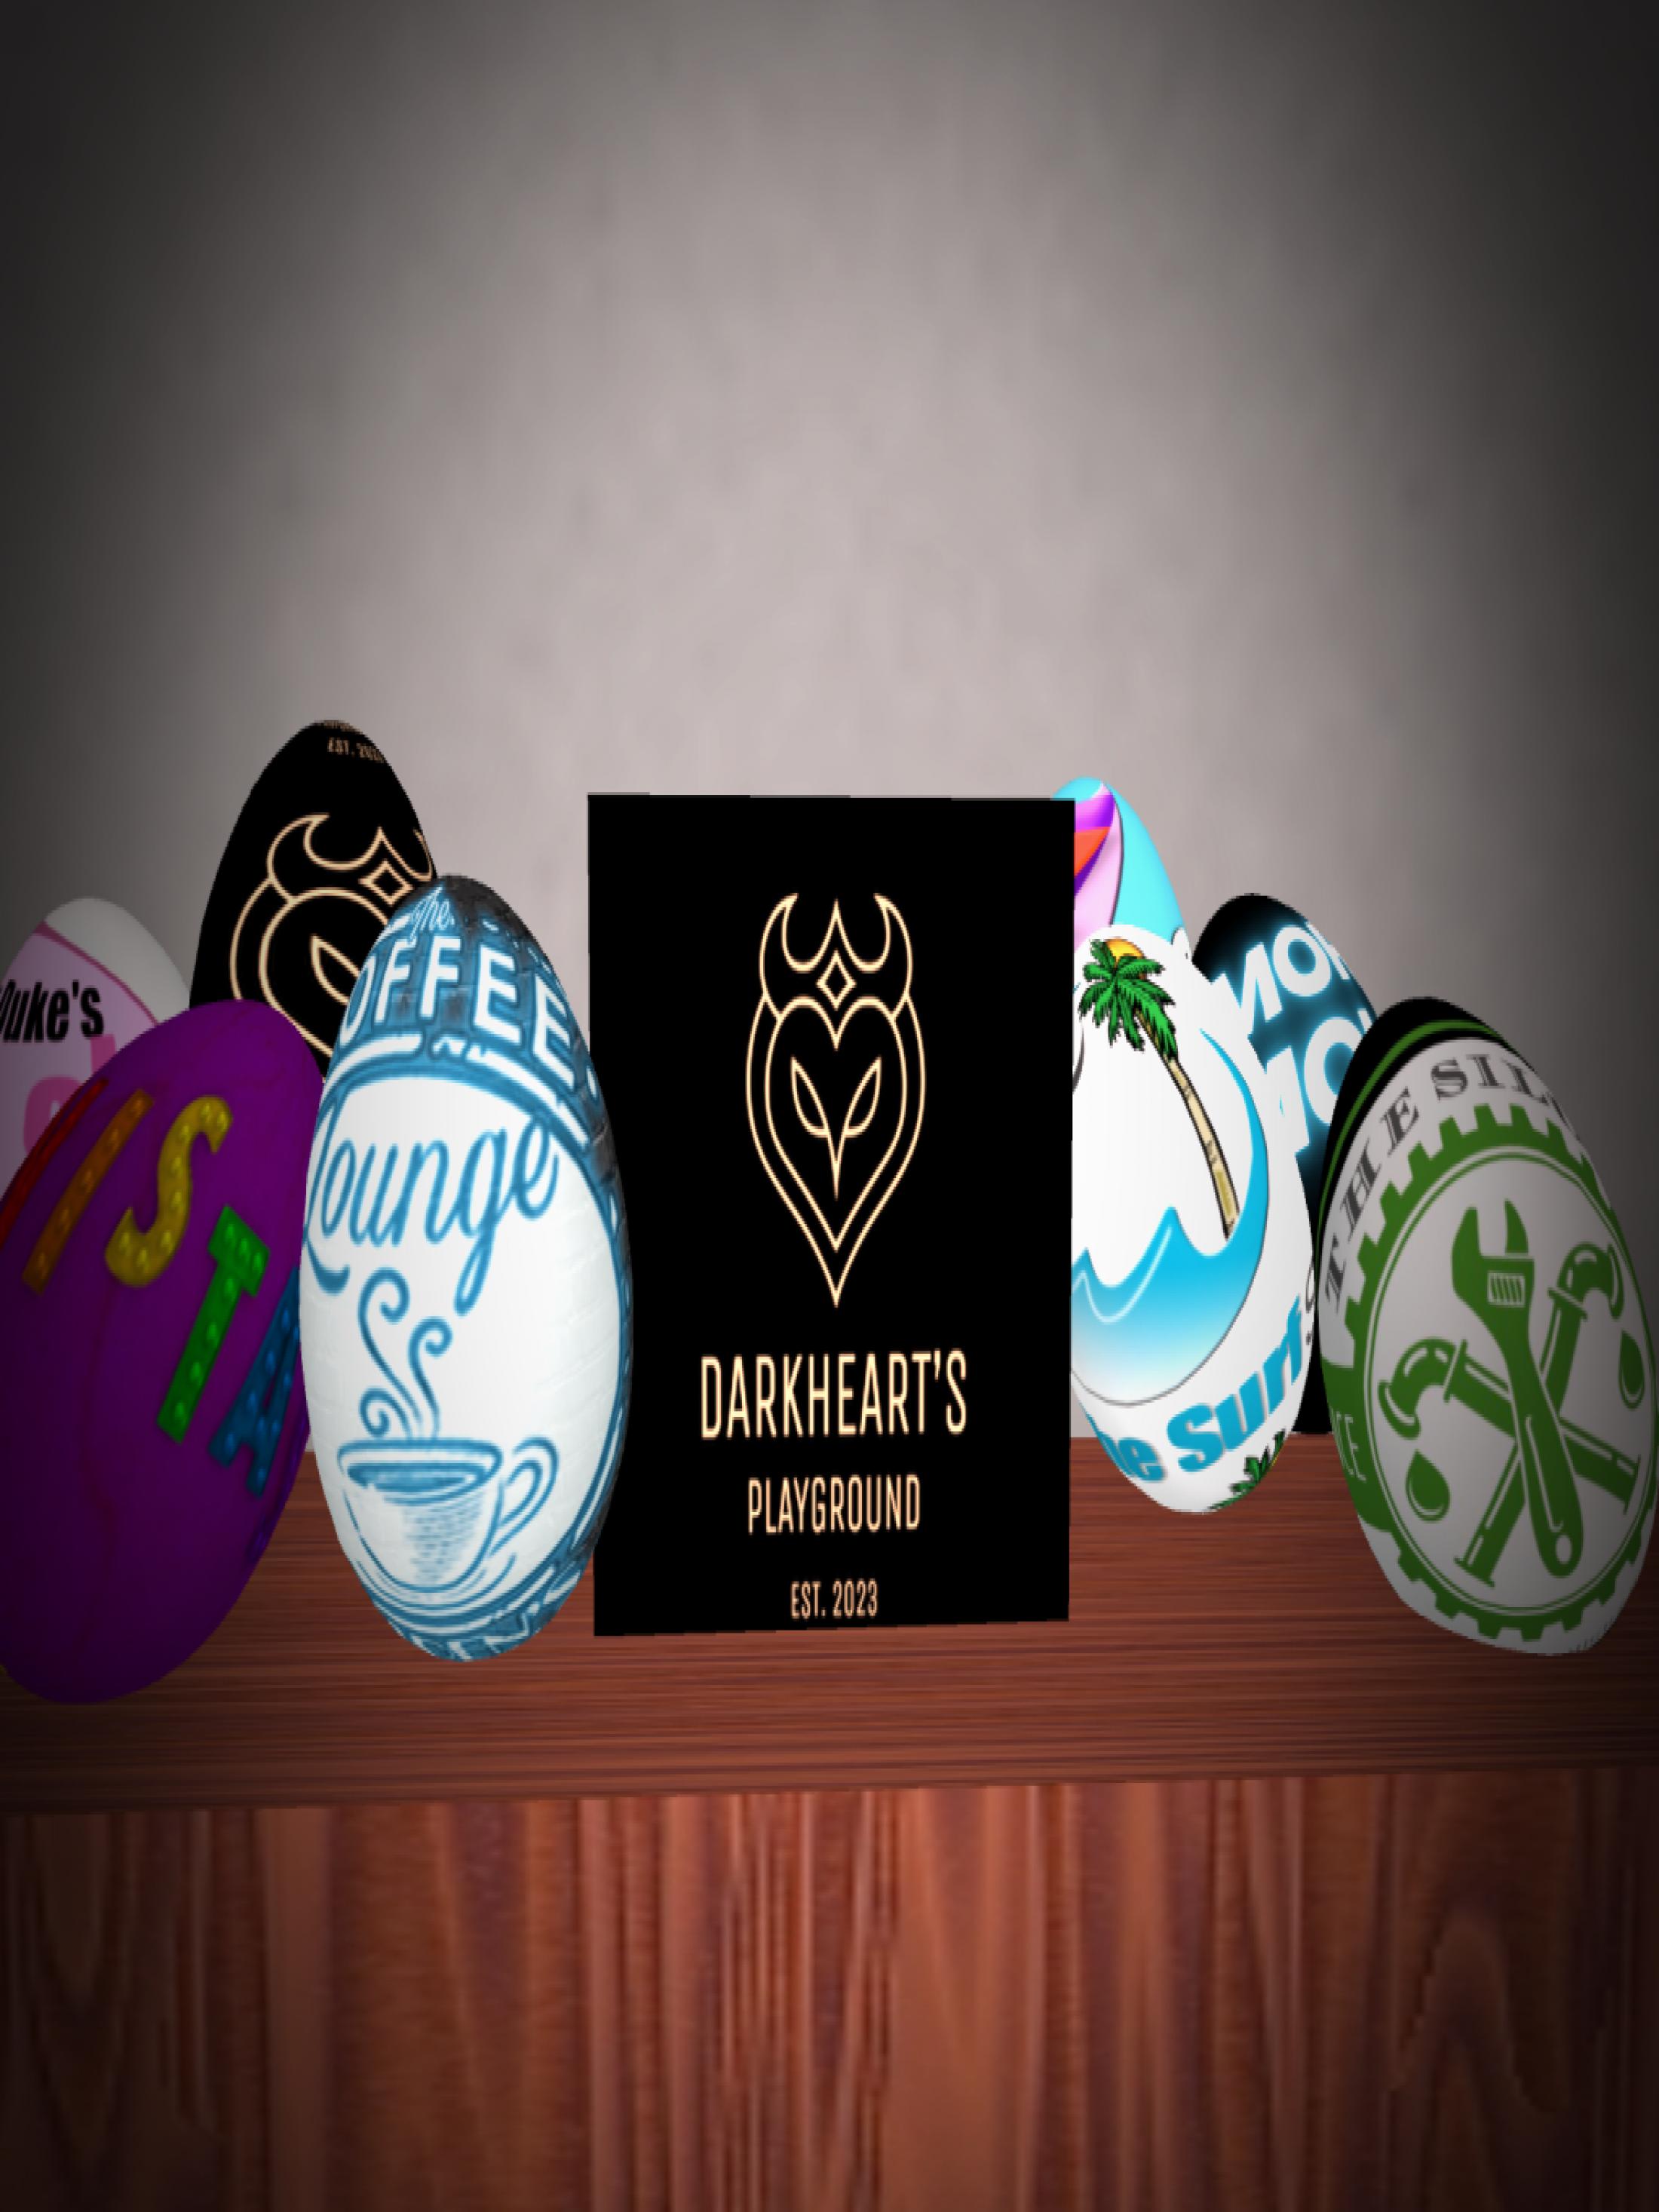 Welcome to the first DHPG Easter Egg Hunt!